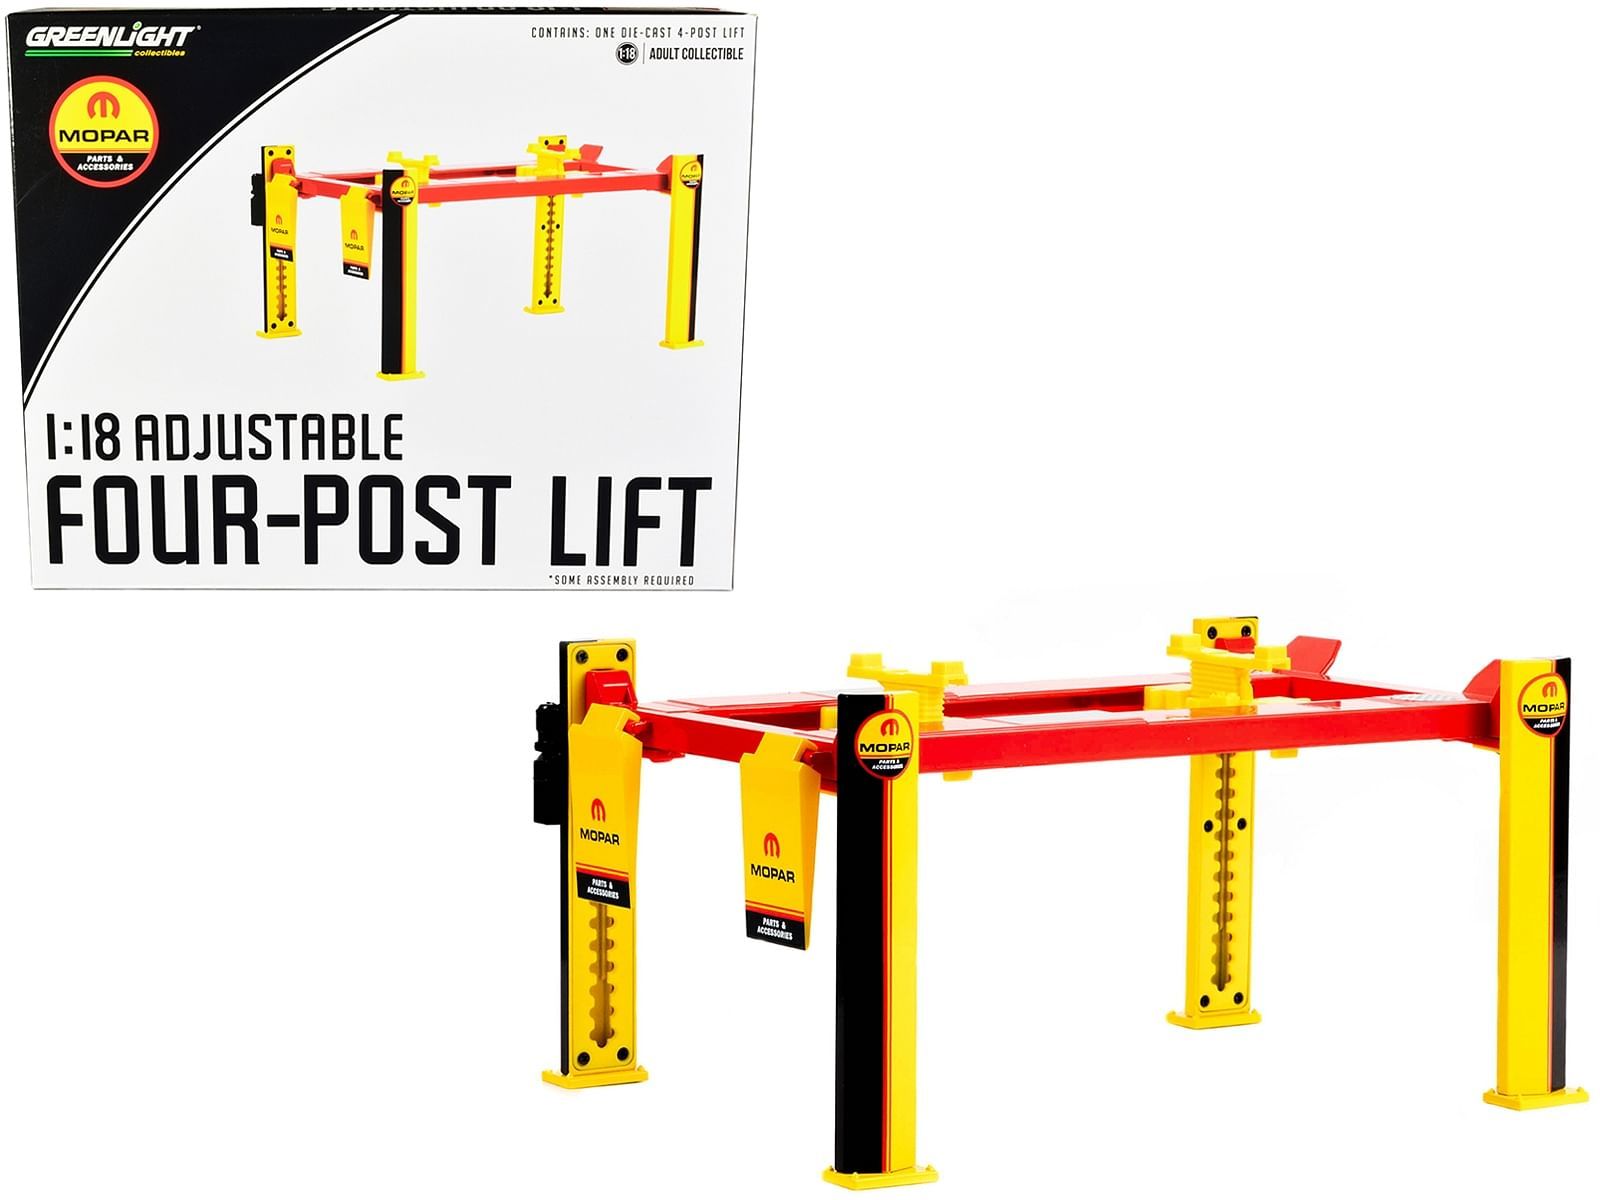 Primary image for Adjustable Four Post Lift "MOPAR" Black and Yellow for 1/18 Scale Diecast Model